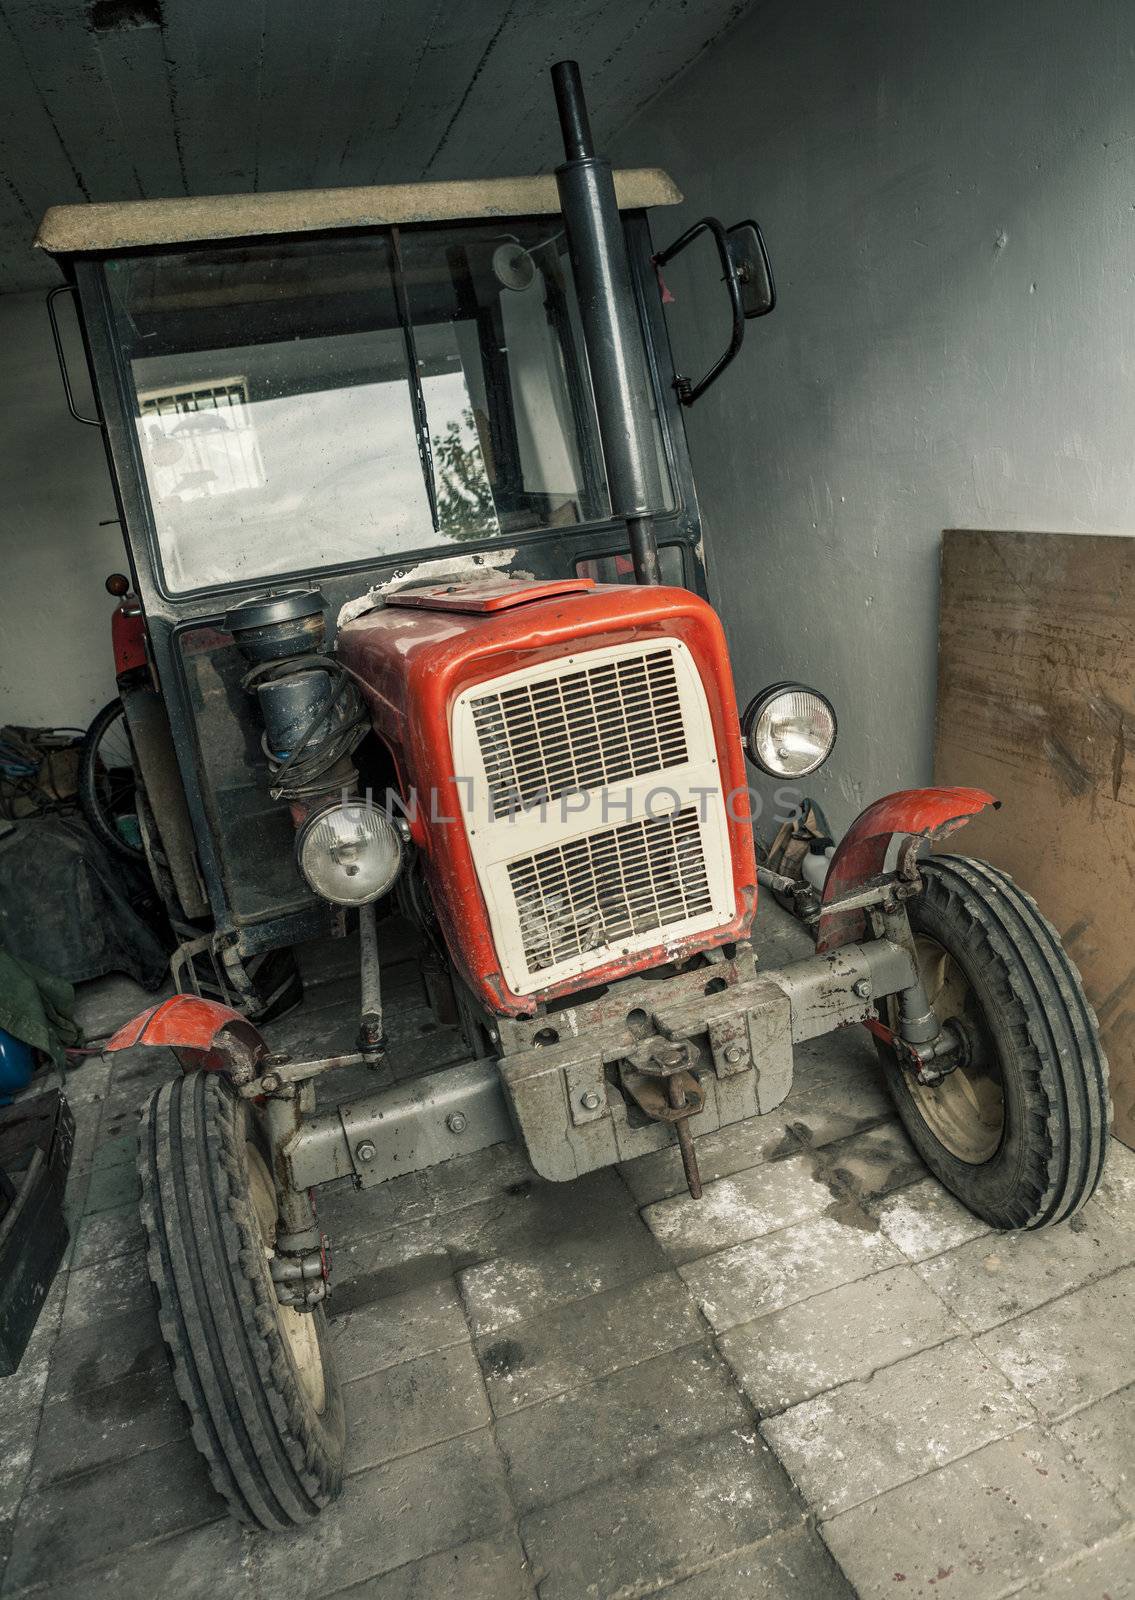 Old rusty tractor in a garage.